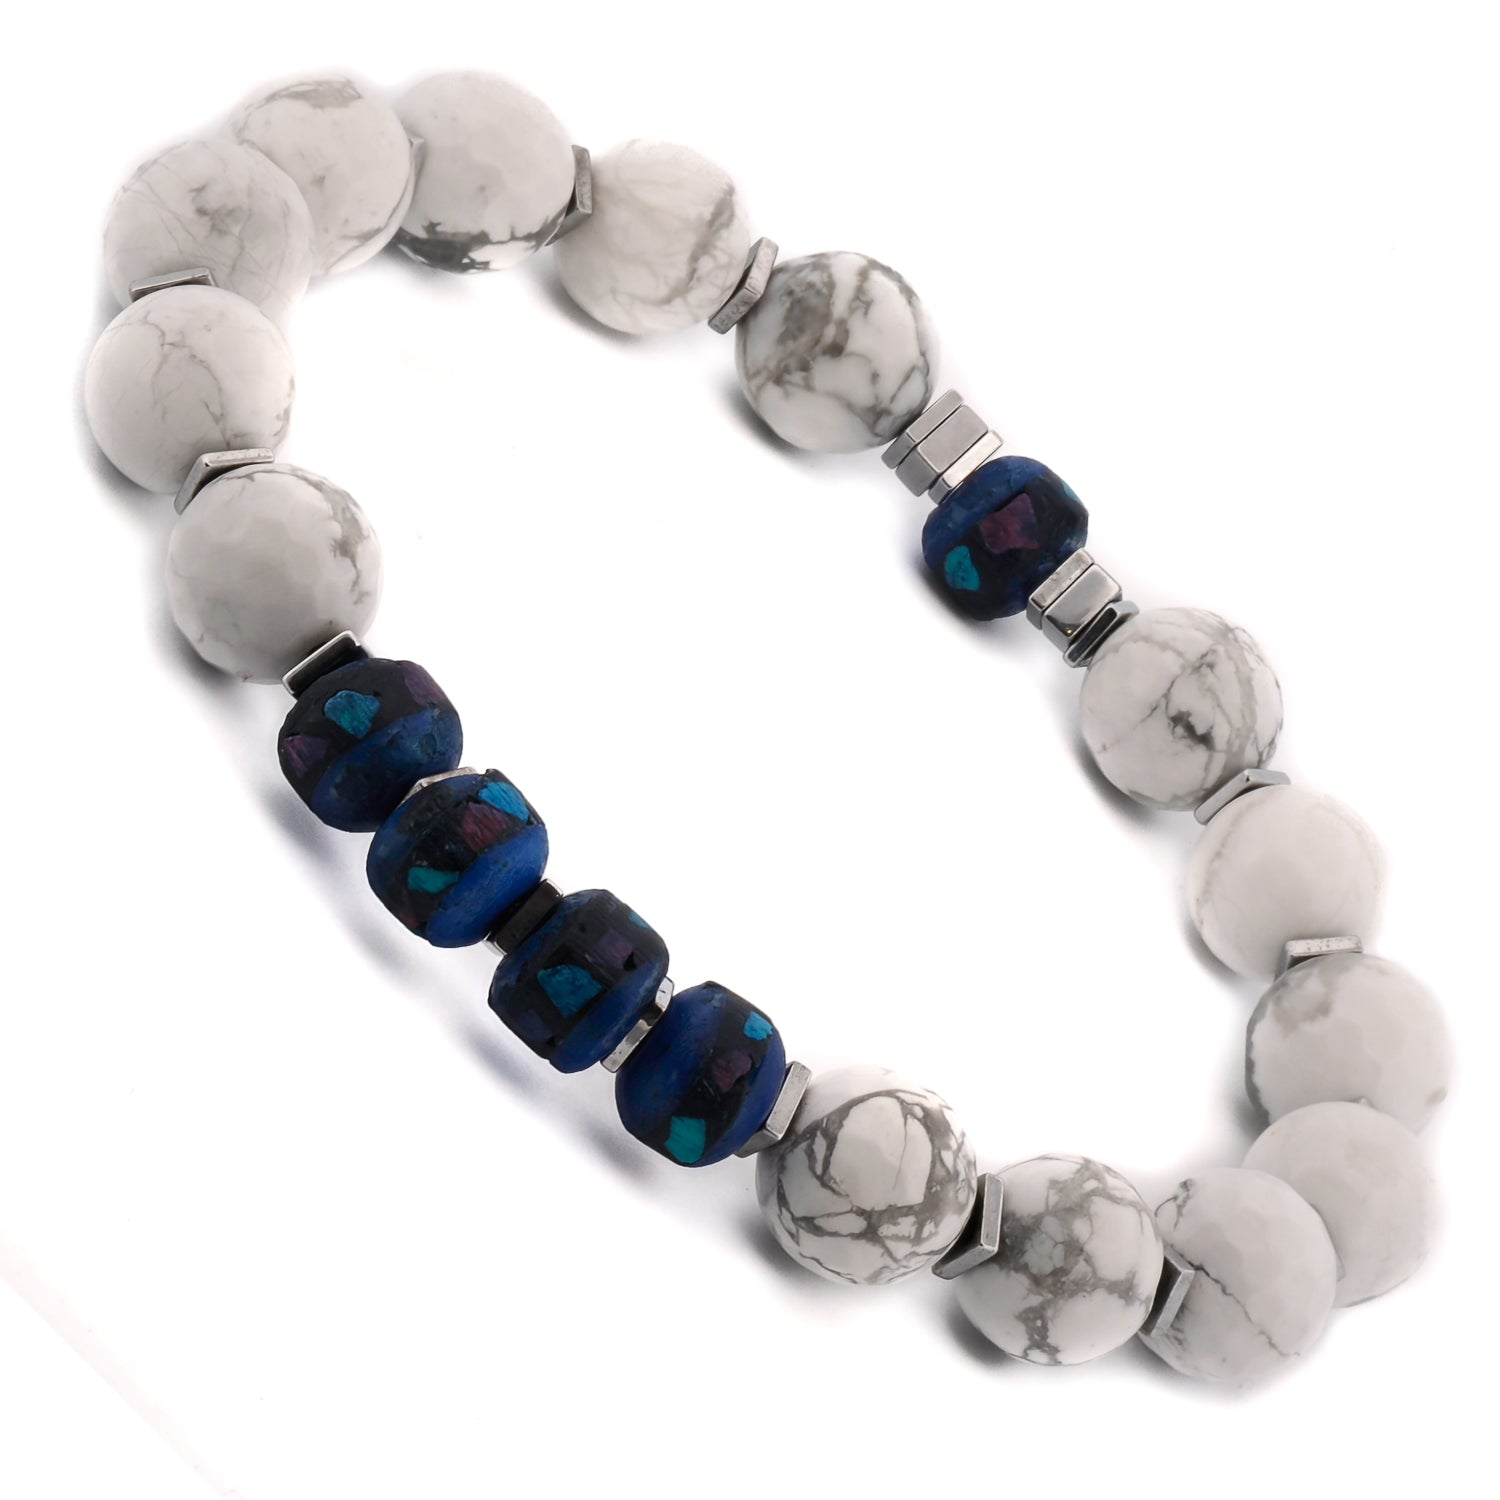 Handcrafted White & Blue Energy Bracelet with calming white howlite beads and striking blue Nepal beads for spiritual enhancement